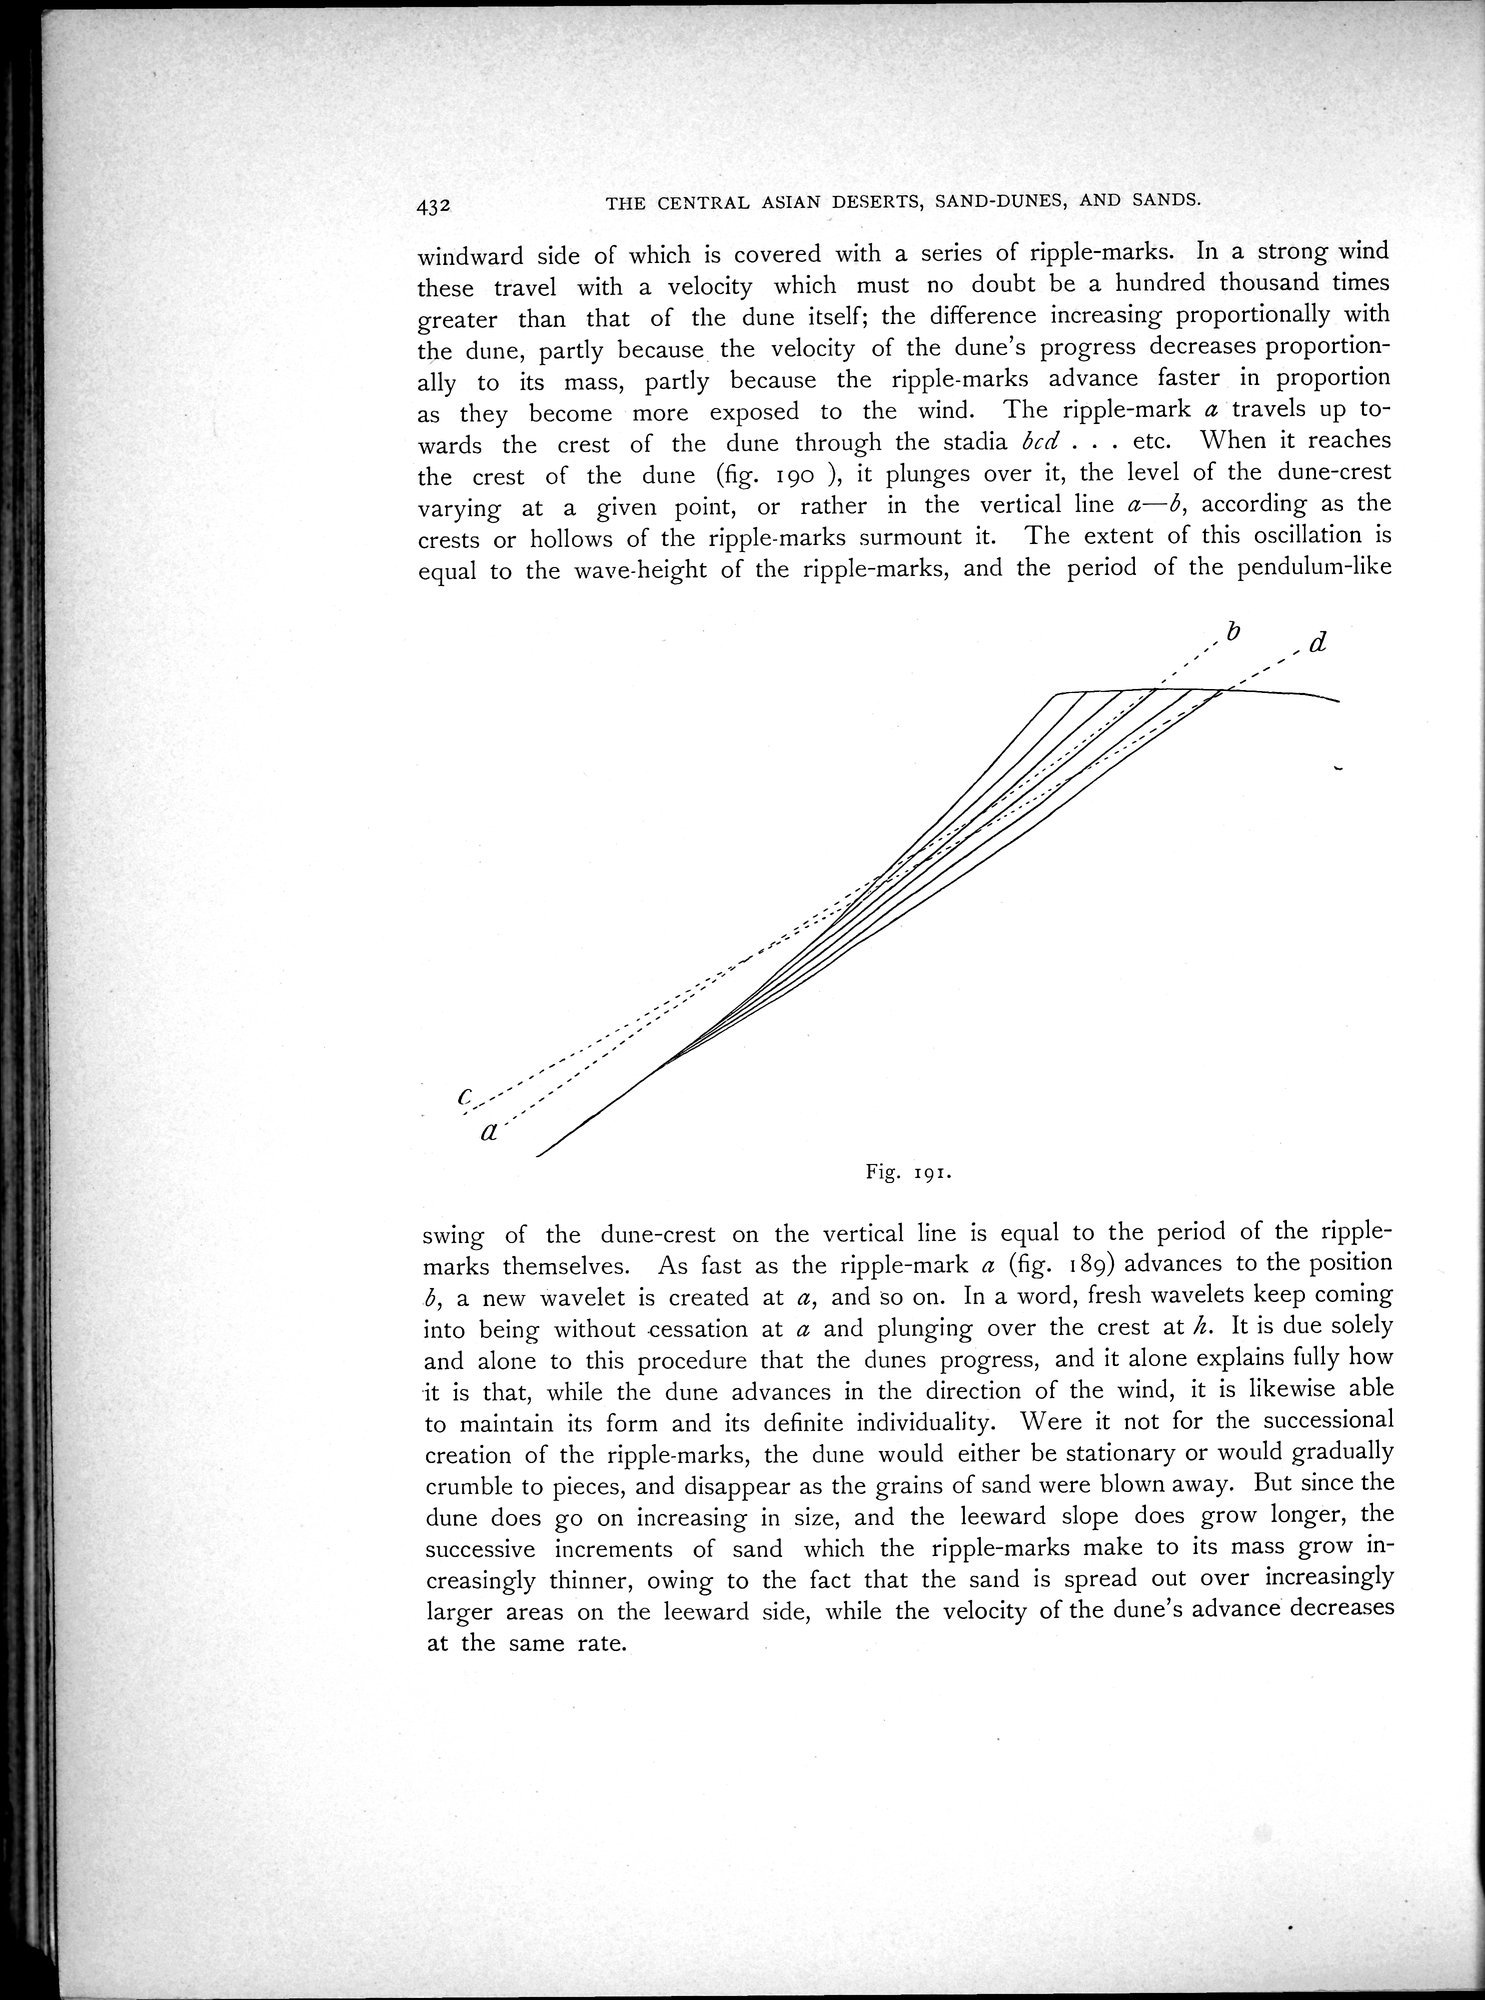 Scientific Results of a Journey in Central Asia, 1899-1902 : vol.2 / 546 ページ（白黒高解像度画像）